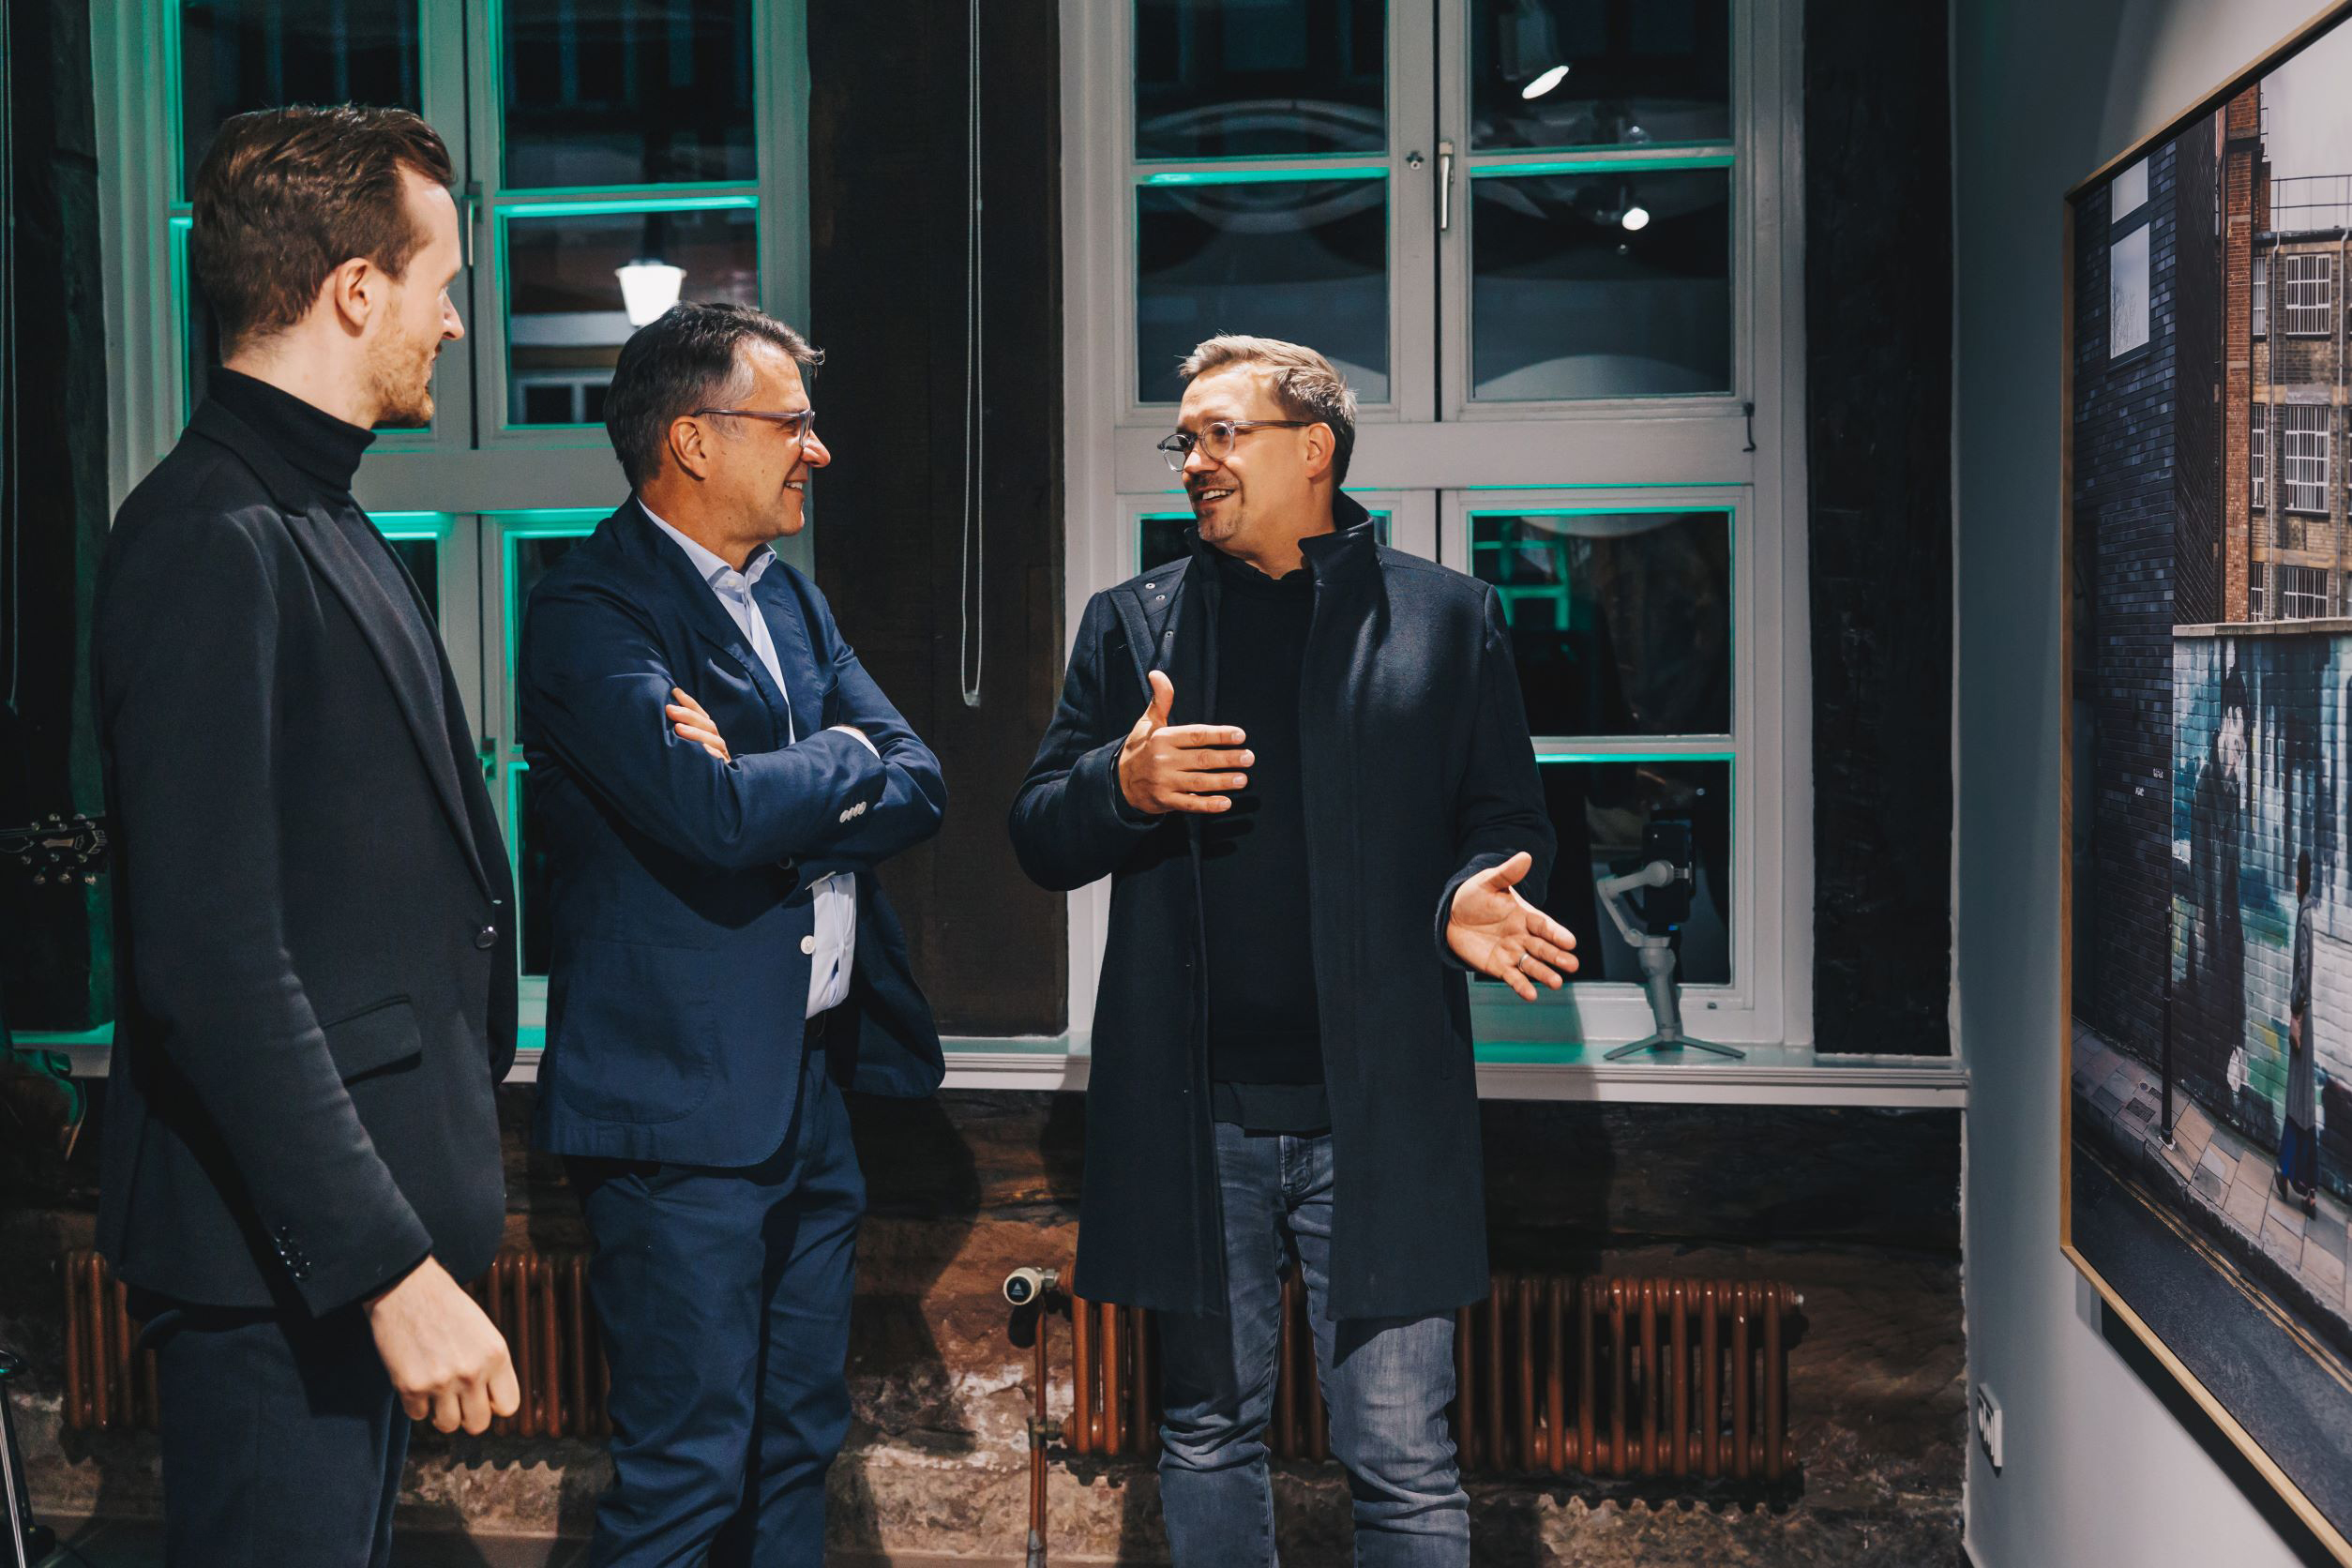 Art historian Alexander Leinemann, KWS Executive Board member Peter Hofmann and artist Roman Thomas during the opening in the NEWCOMER KWS Art Lounge (from left) 